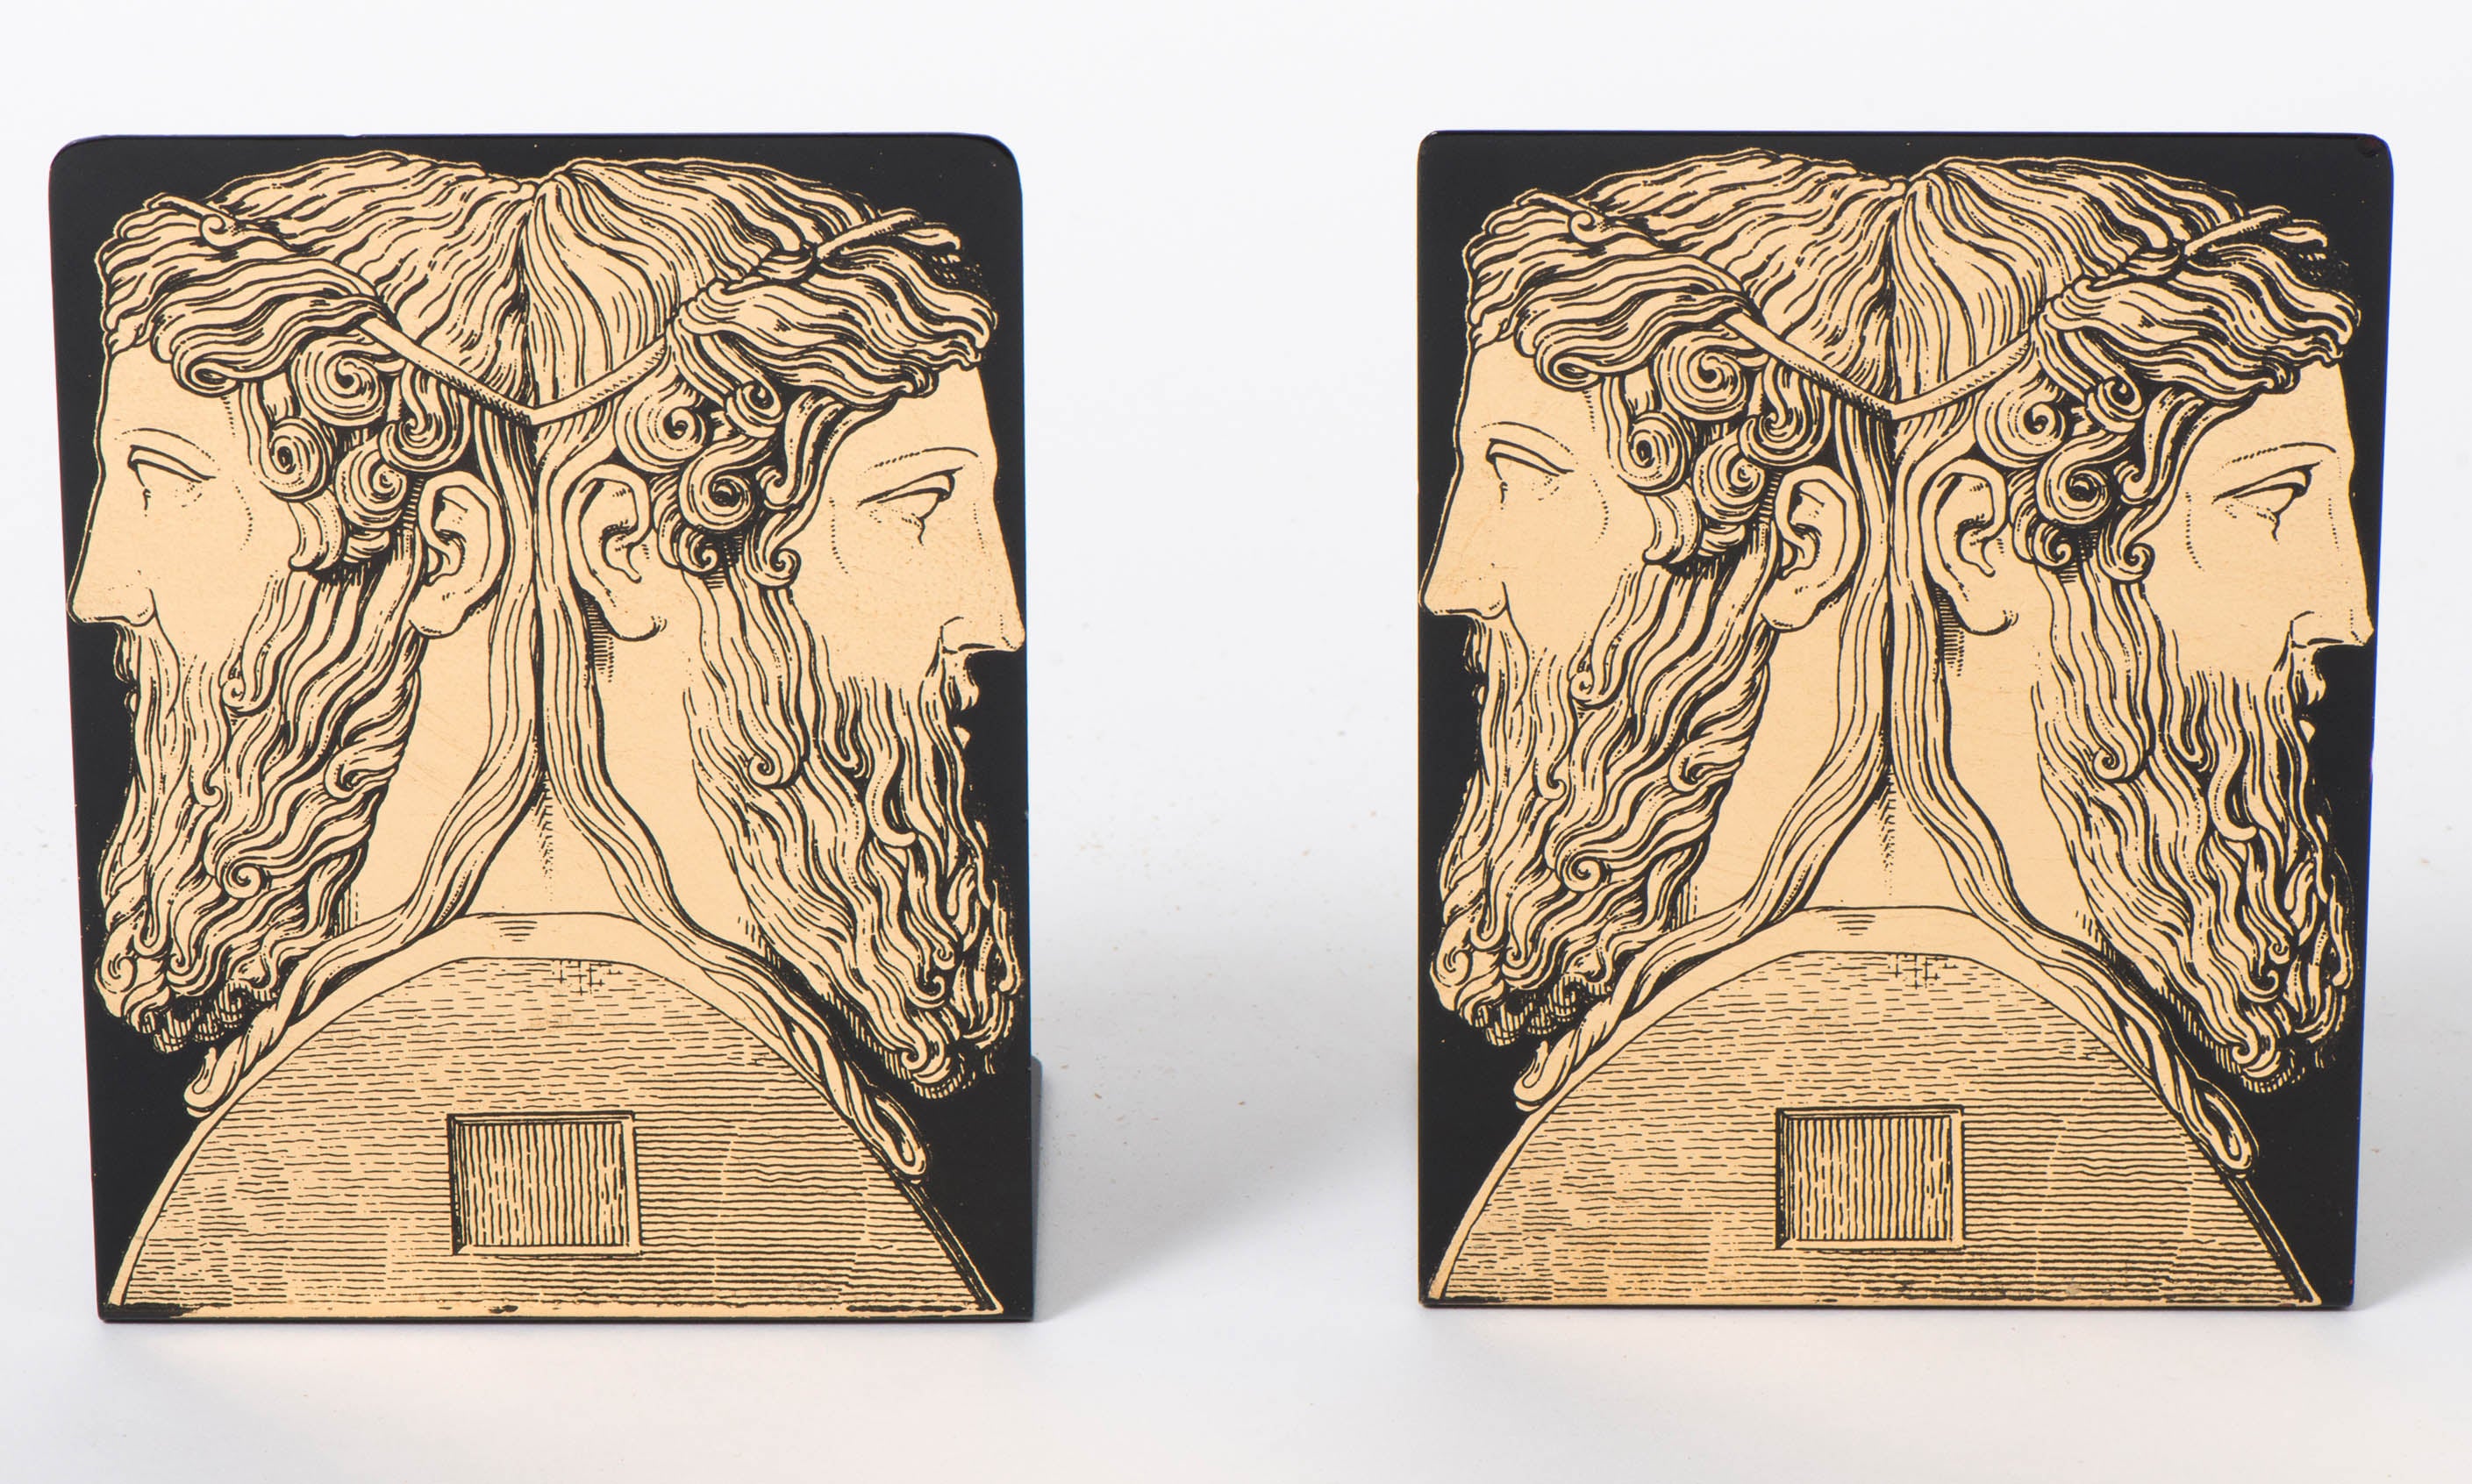 Pair of Janus Bookends by Piero Fornasetti